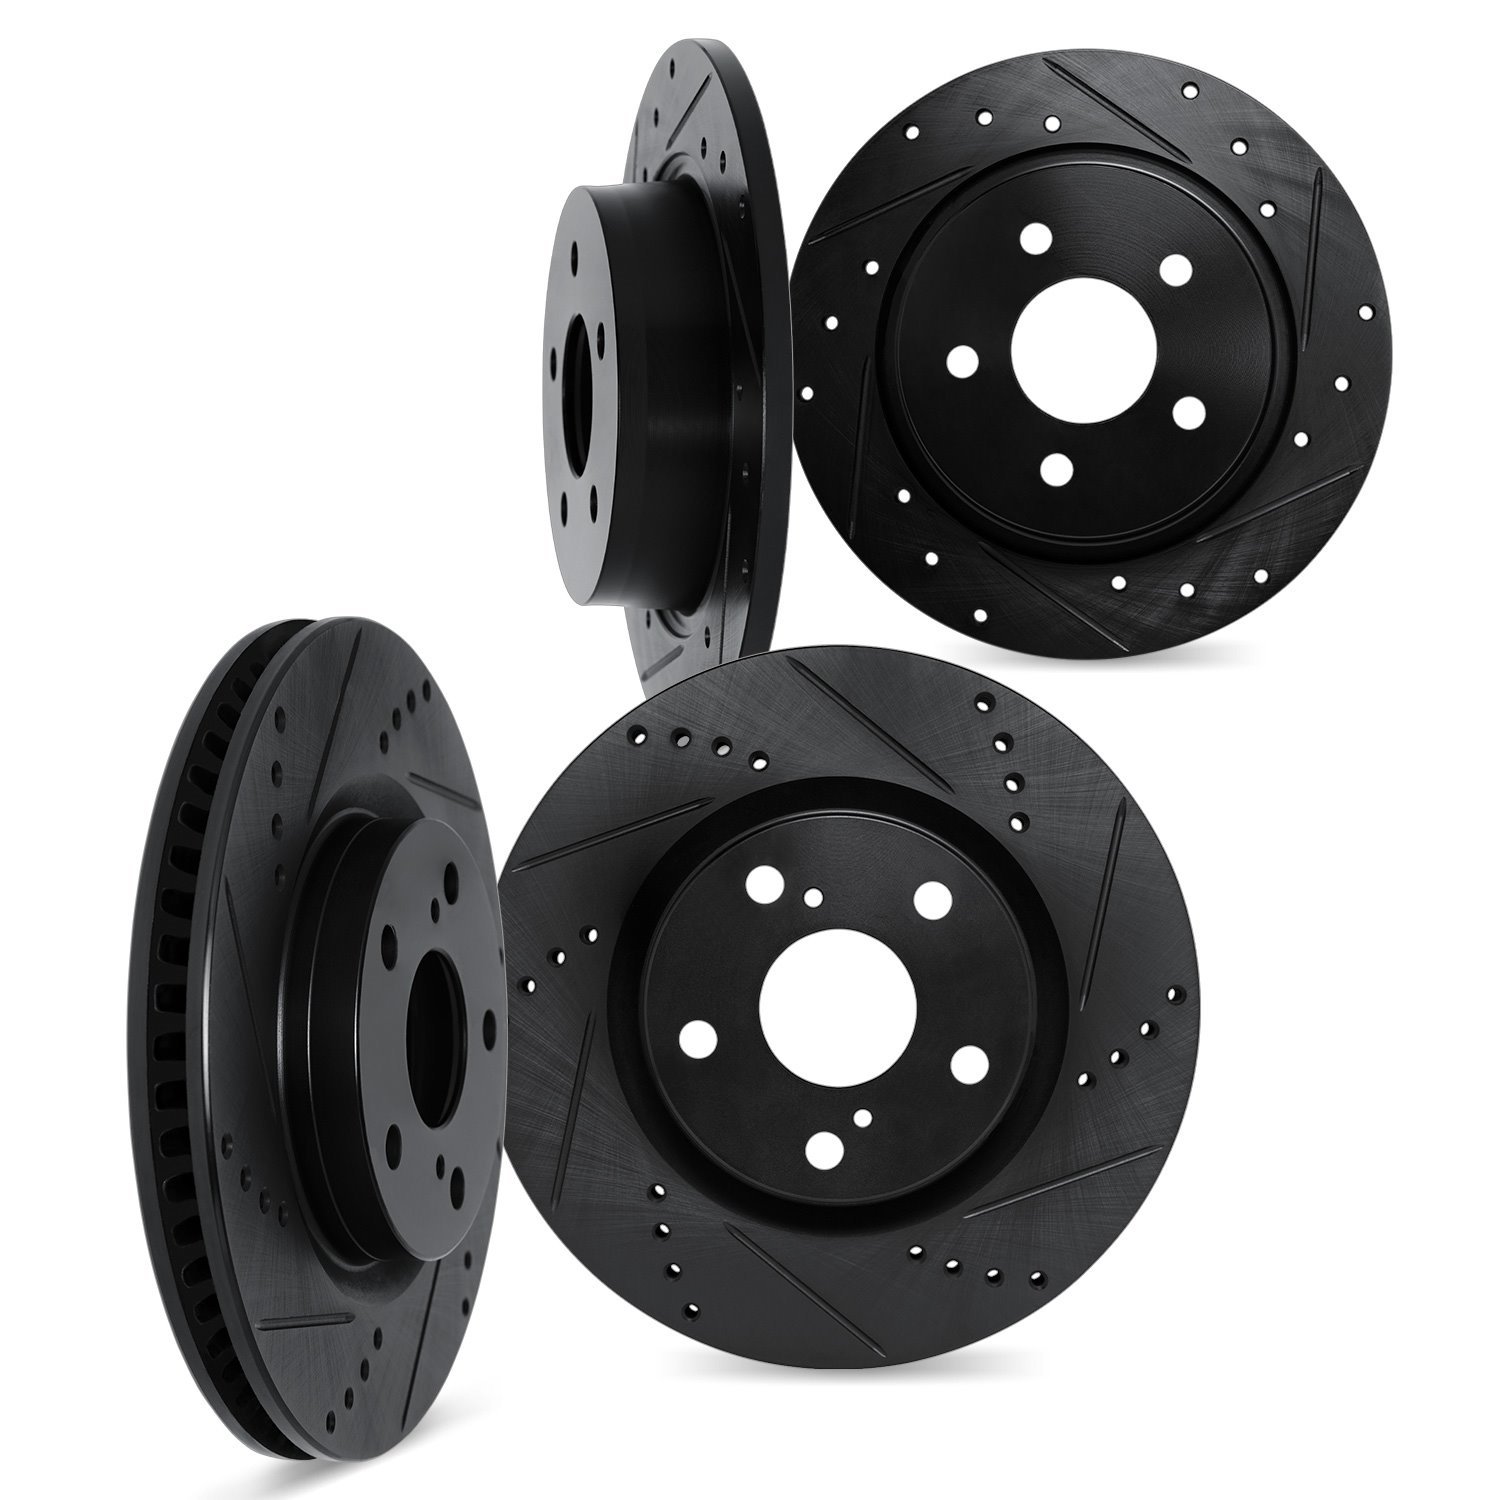 8004-74008 Drilled/Slotted Brake Rotors [Black], Fits Select Multiple Makes/Models, Position: Front and Rear